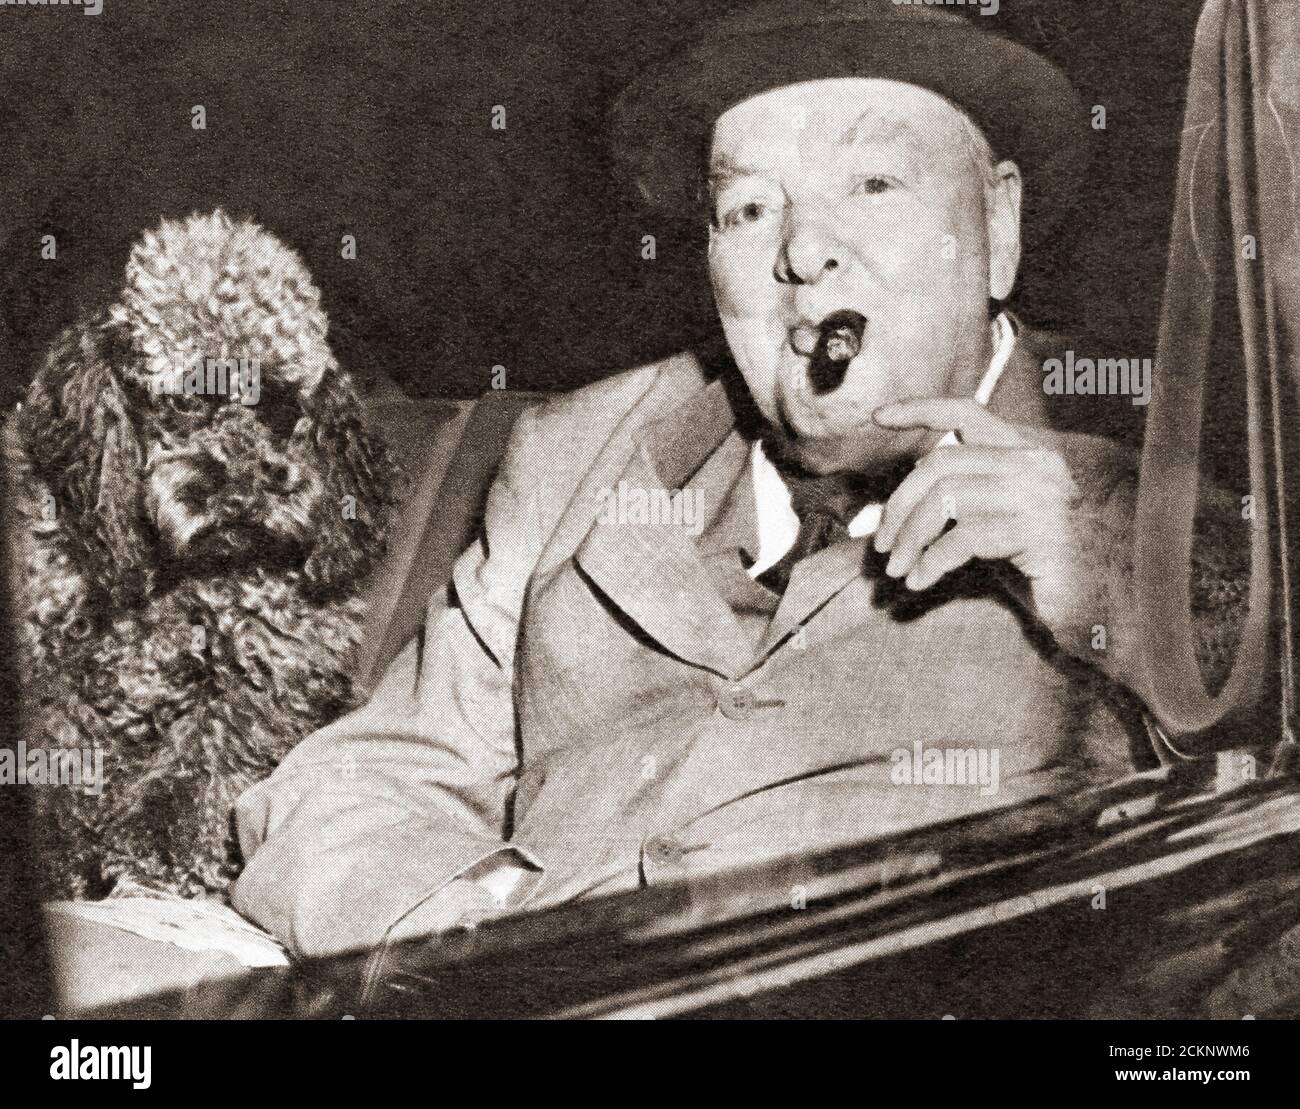 Winston Churchill, seen here with his pet poodle Rufus II.  Sir Winston Leonard Spencer-Churchill, 1874 – 1965. British politician, army officer, writer and twice Prime Minister of the United Kingdom. Stock Photo